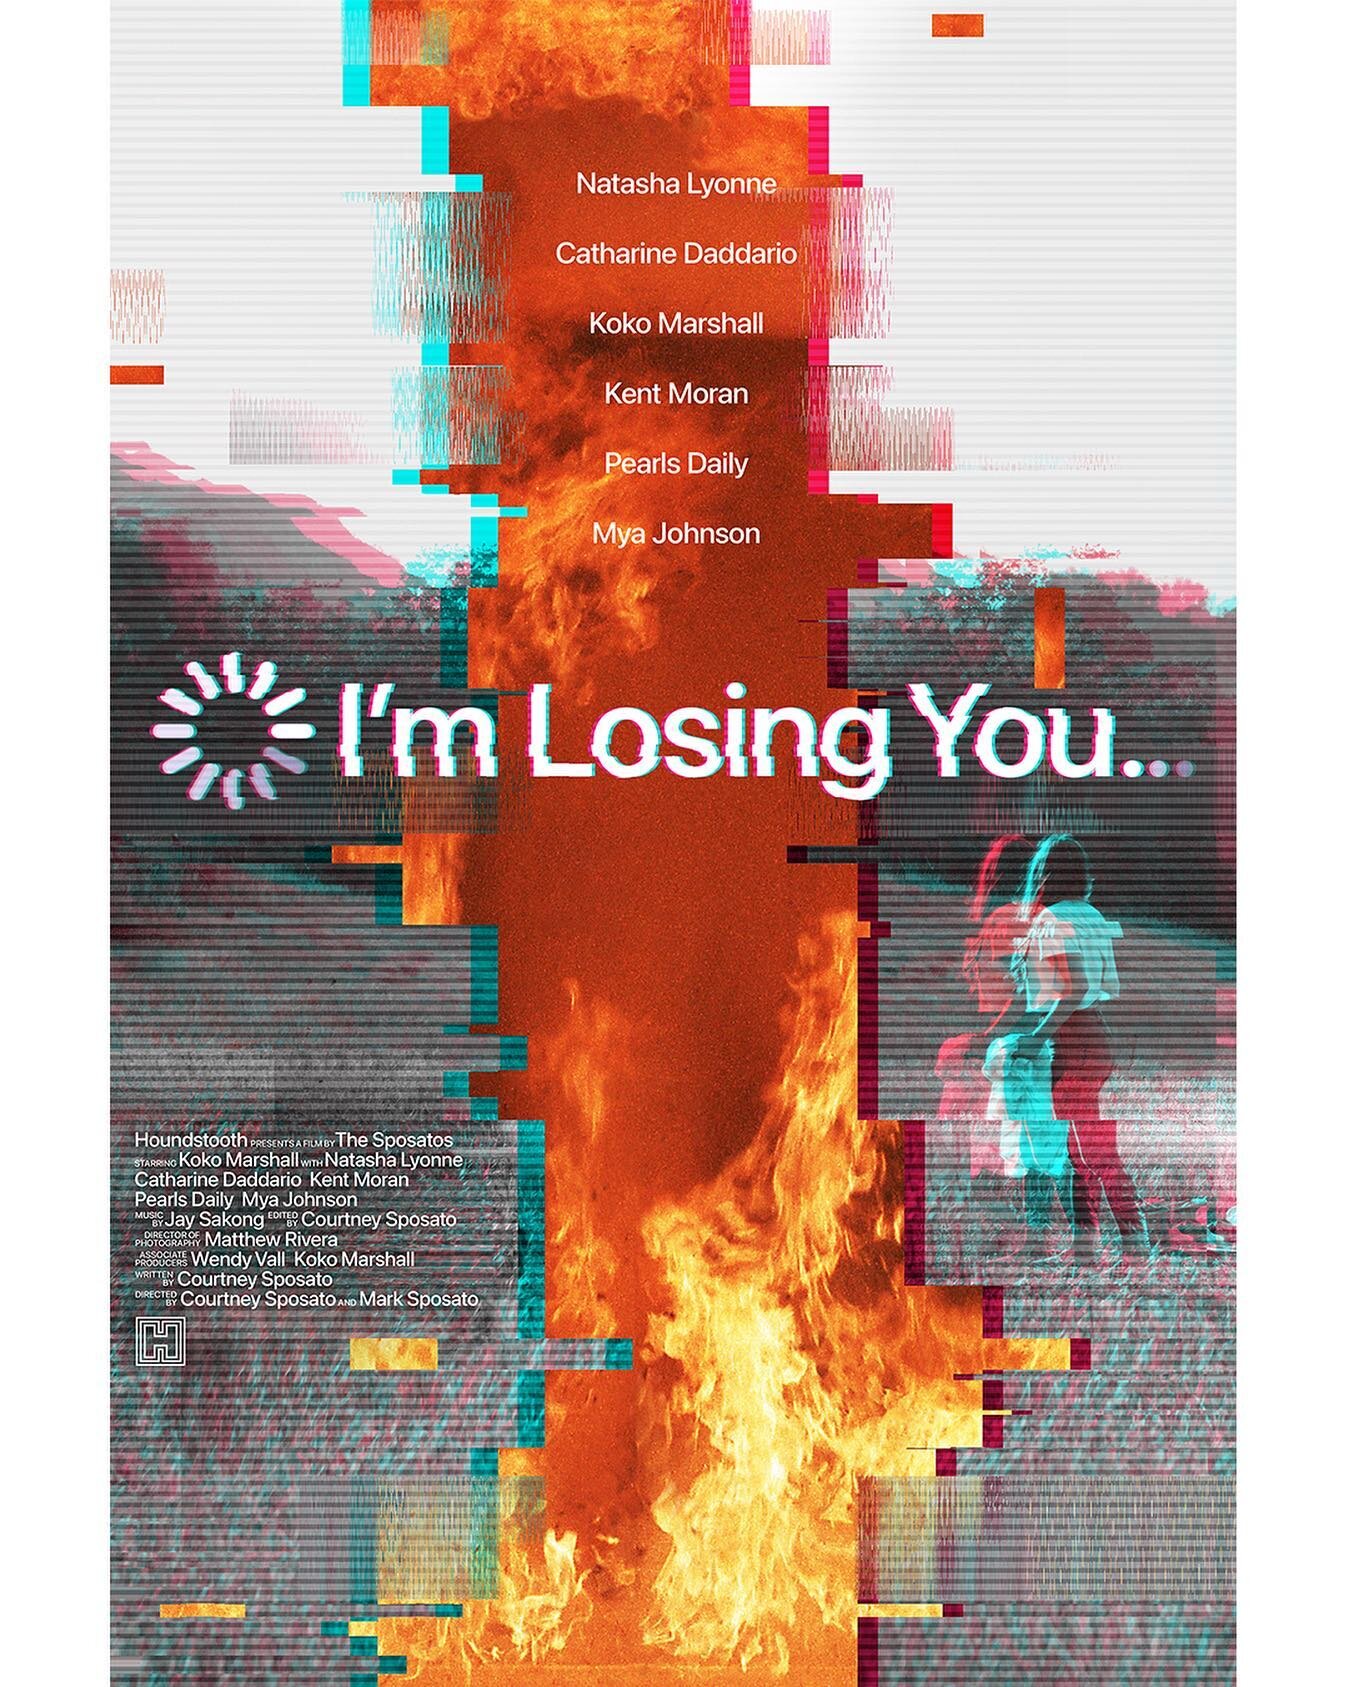 Check out the poster Mark made for his latest short film!

&ldquo;I&rsquo;m Losing You&rdquo; is an experimental take on the screen life genre, depicting the aftermath of every parents&rsquo; worst nightmare. 

@houndstoothstudios 

💻 🔥

#poster #p